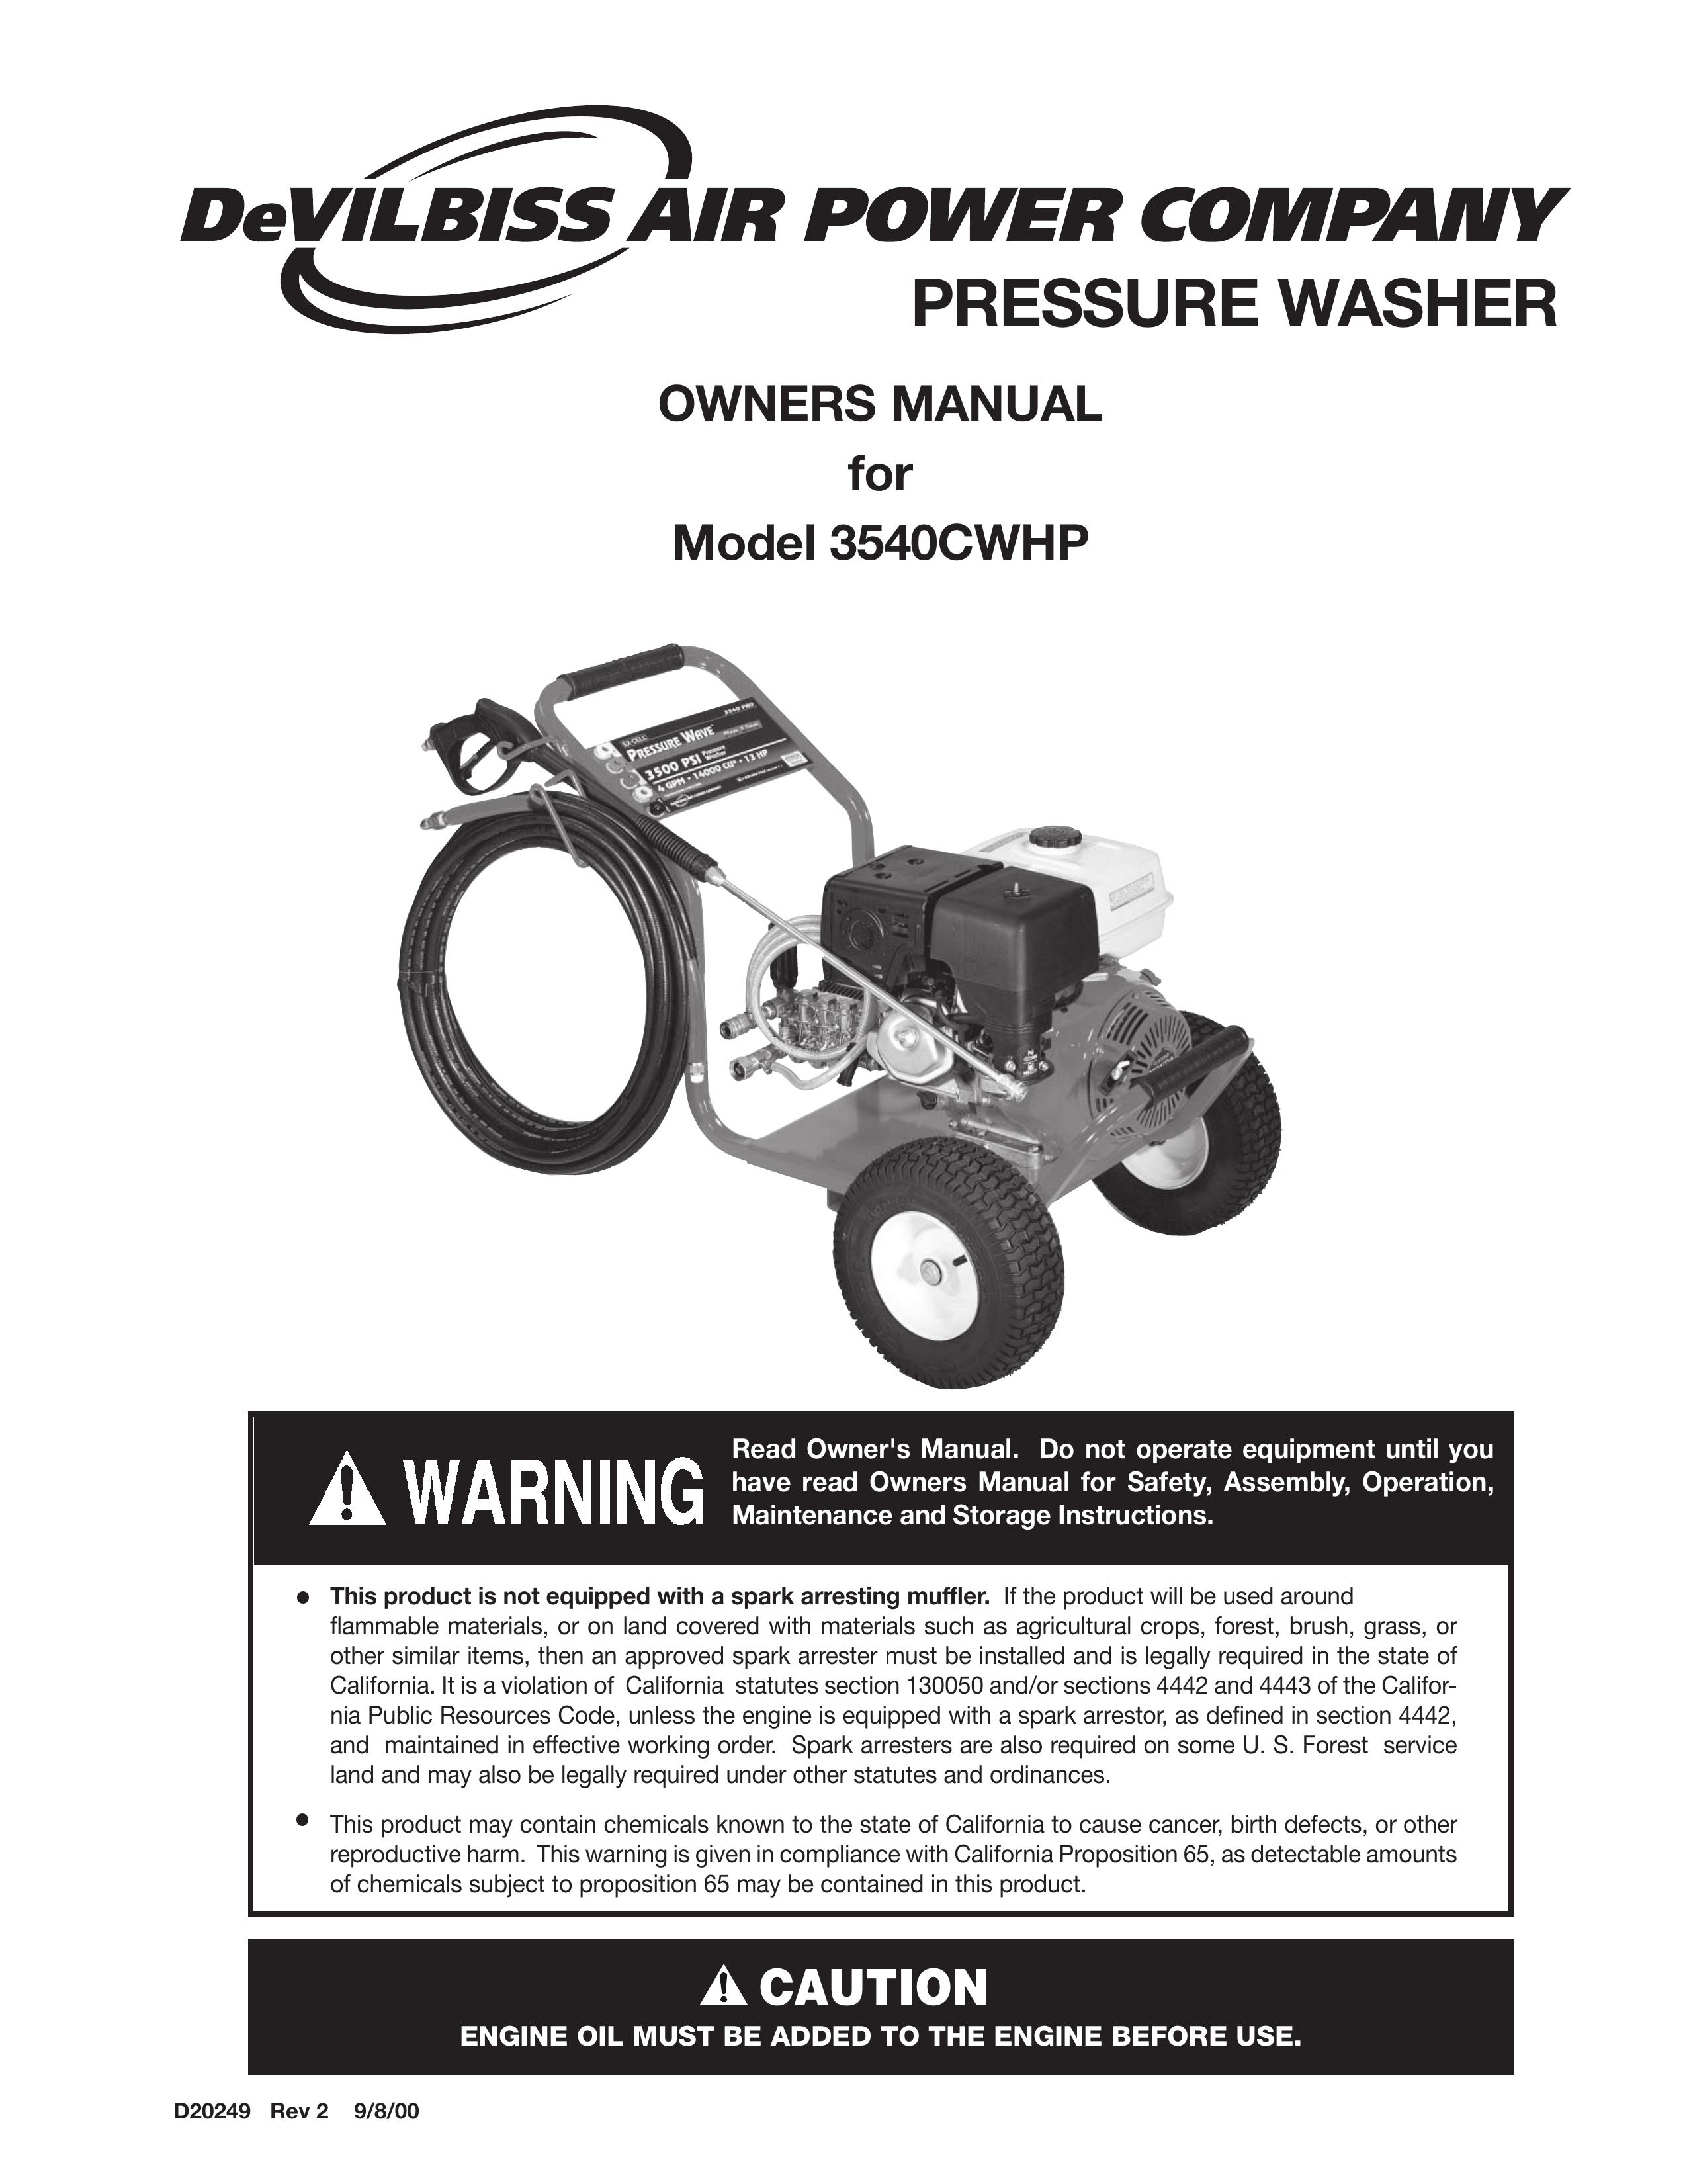 DeVillbiss Air Power Company 3540CWHP Pressure Washer User Manual